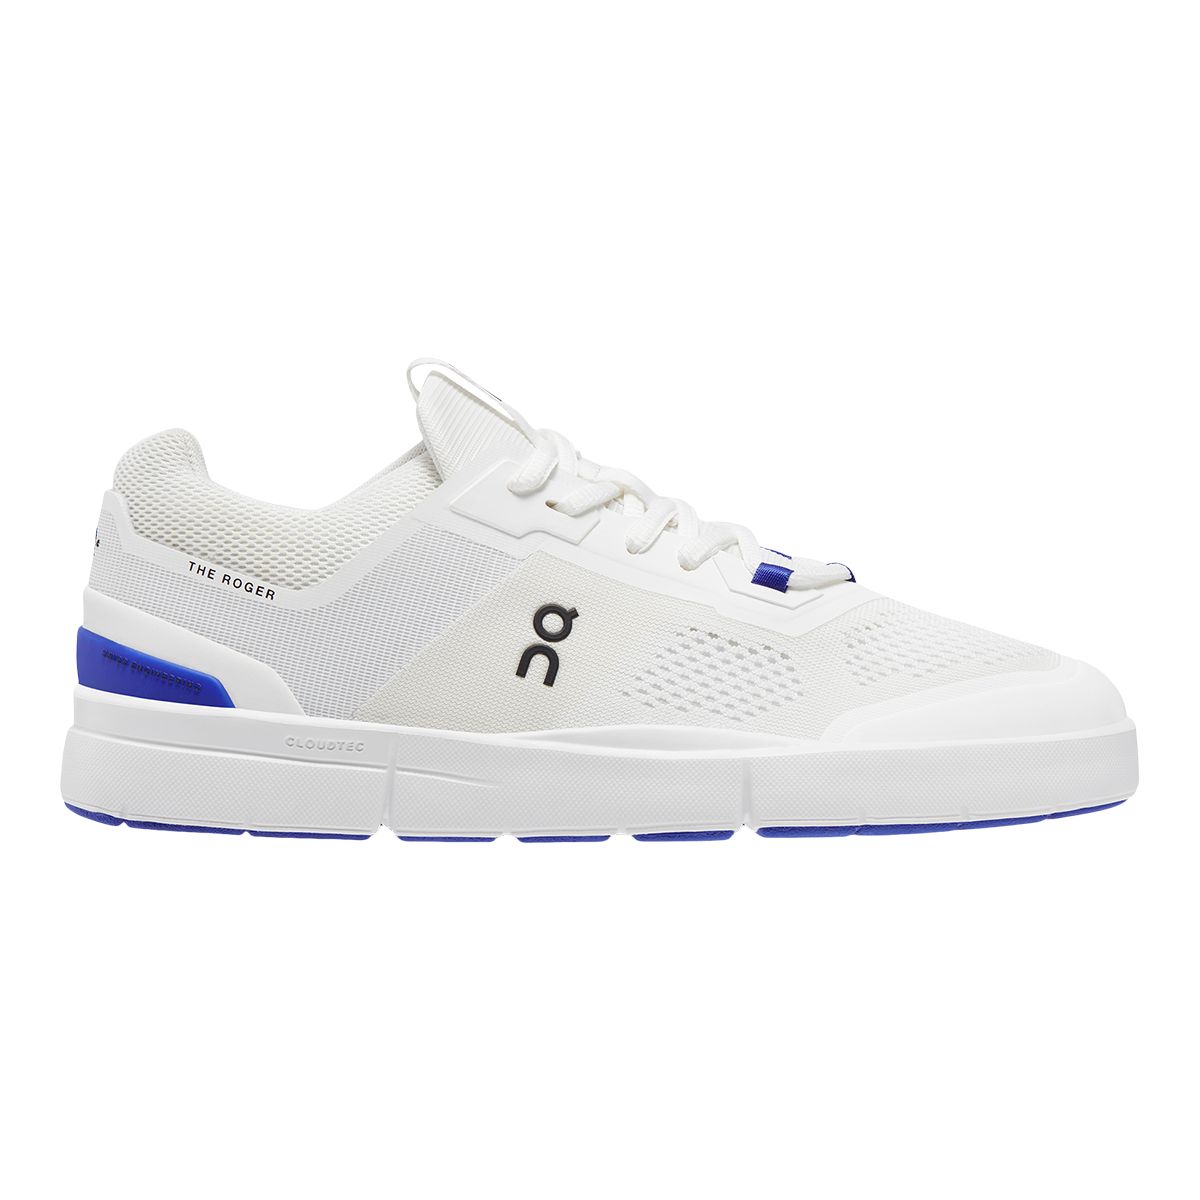 Image of On Women's THE Roger Spin Shoes